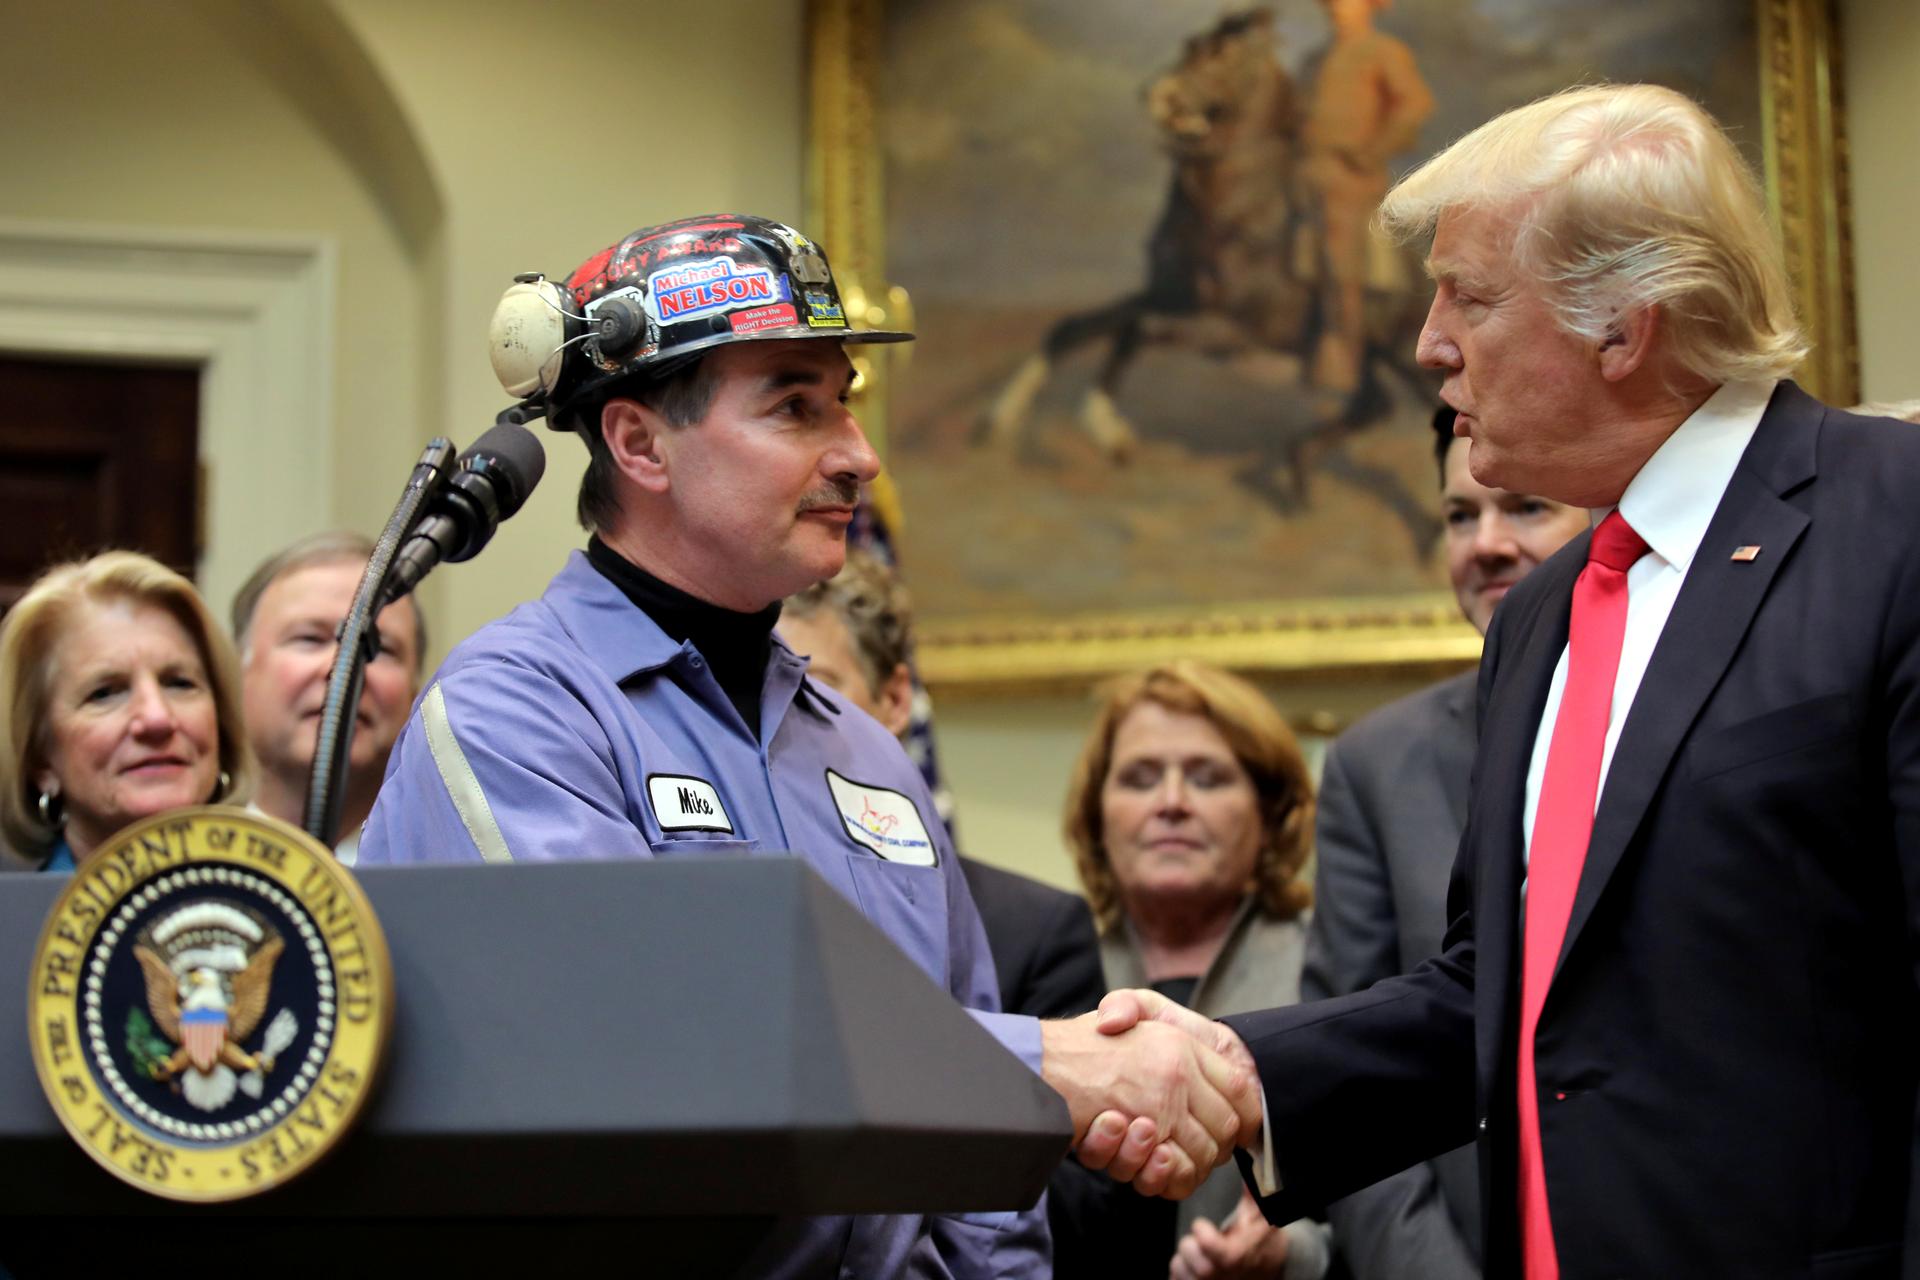 President Trump shakes hands with a coal miner